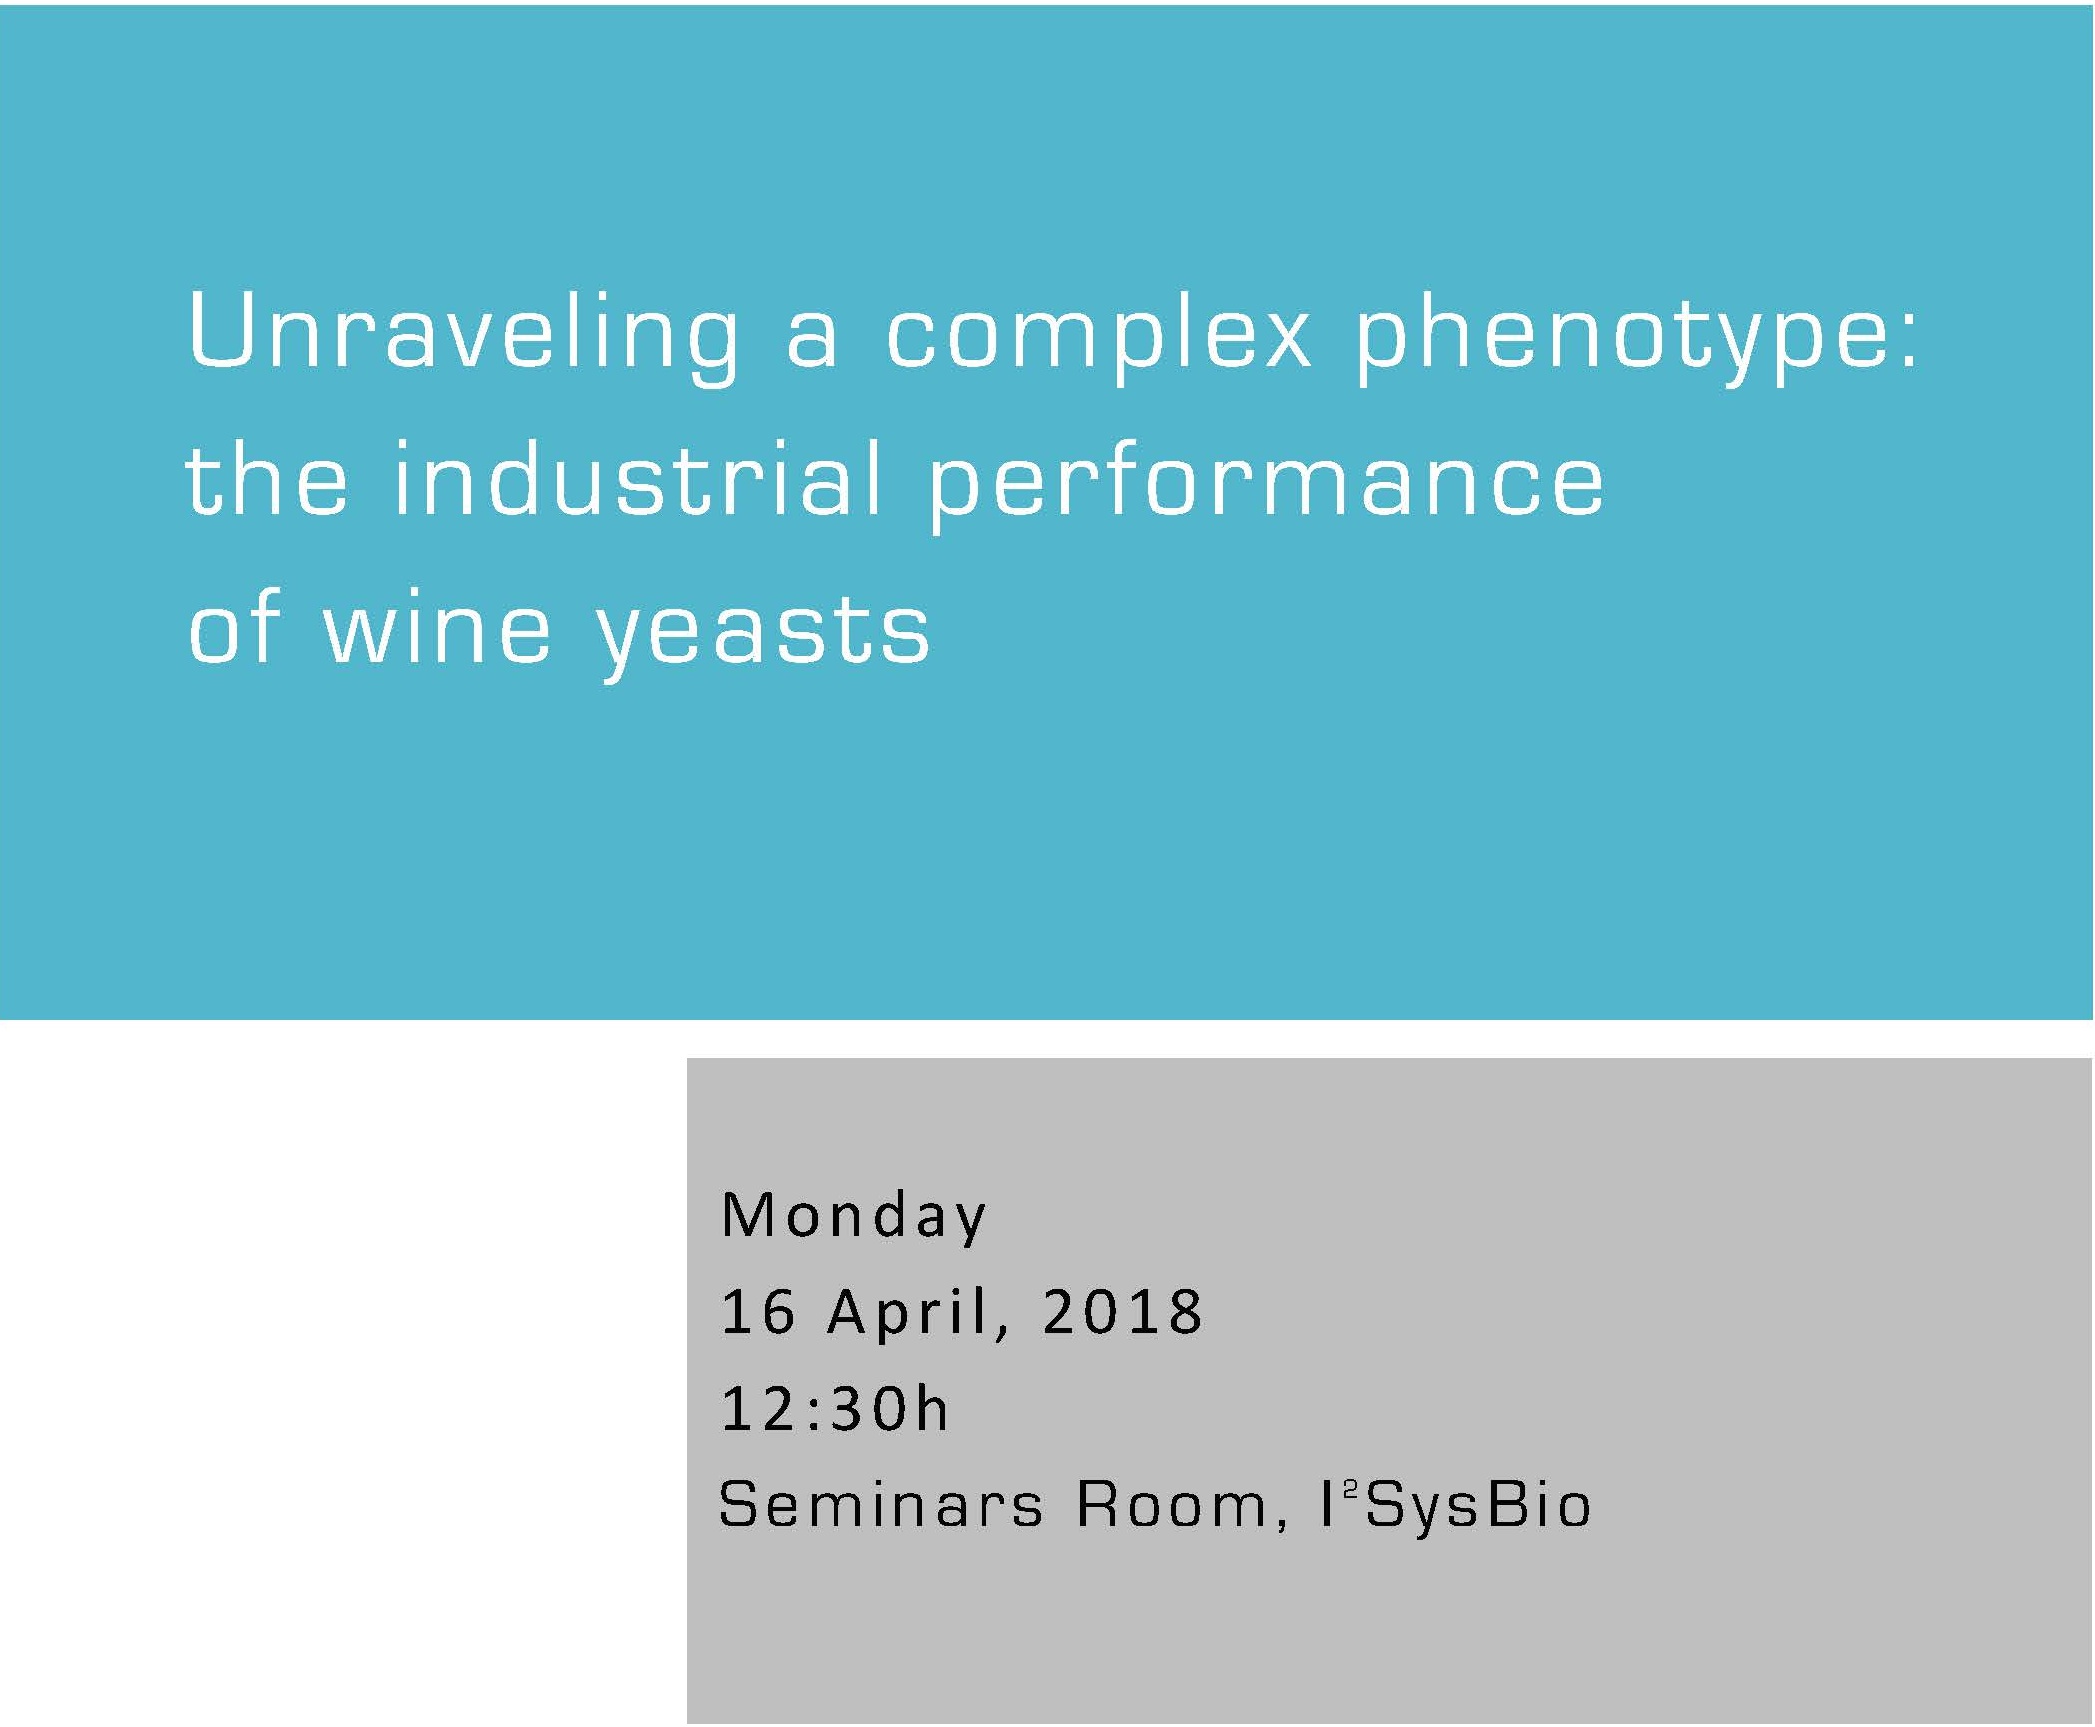 Unraveling a complex phenotype: the industrial performance of wine yeasts